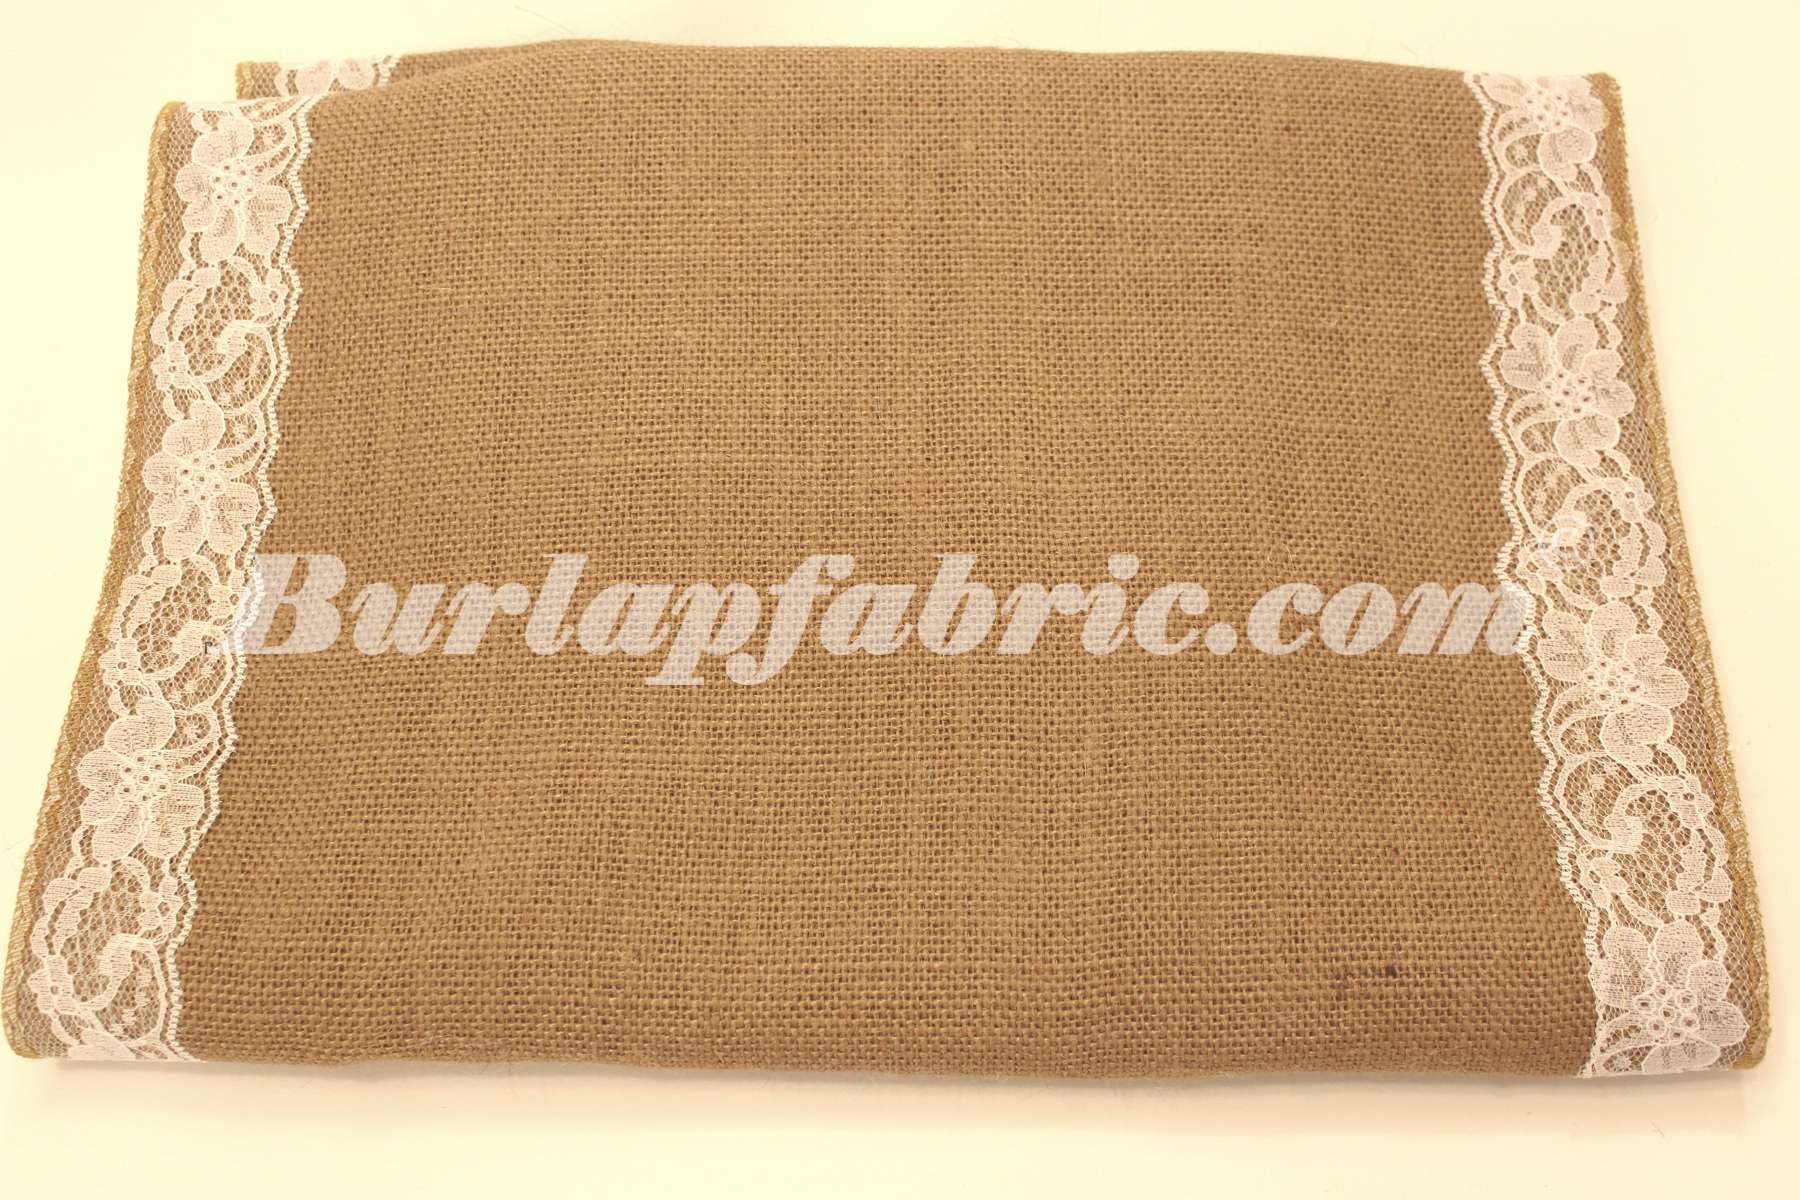 14" Idaho Burlap Runner with 2" White Lace Borders